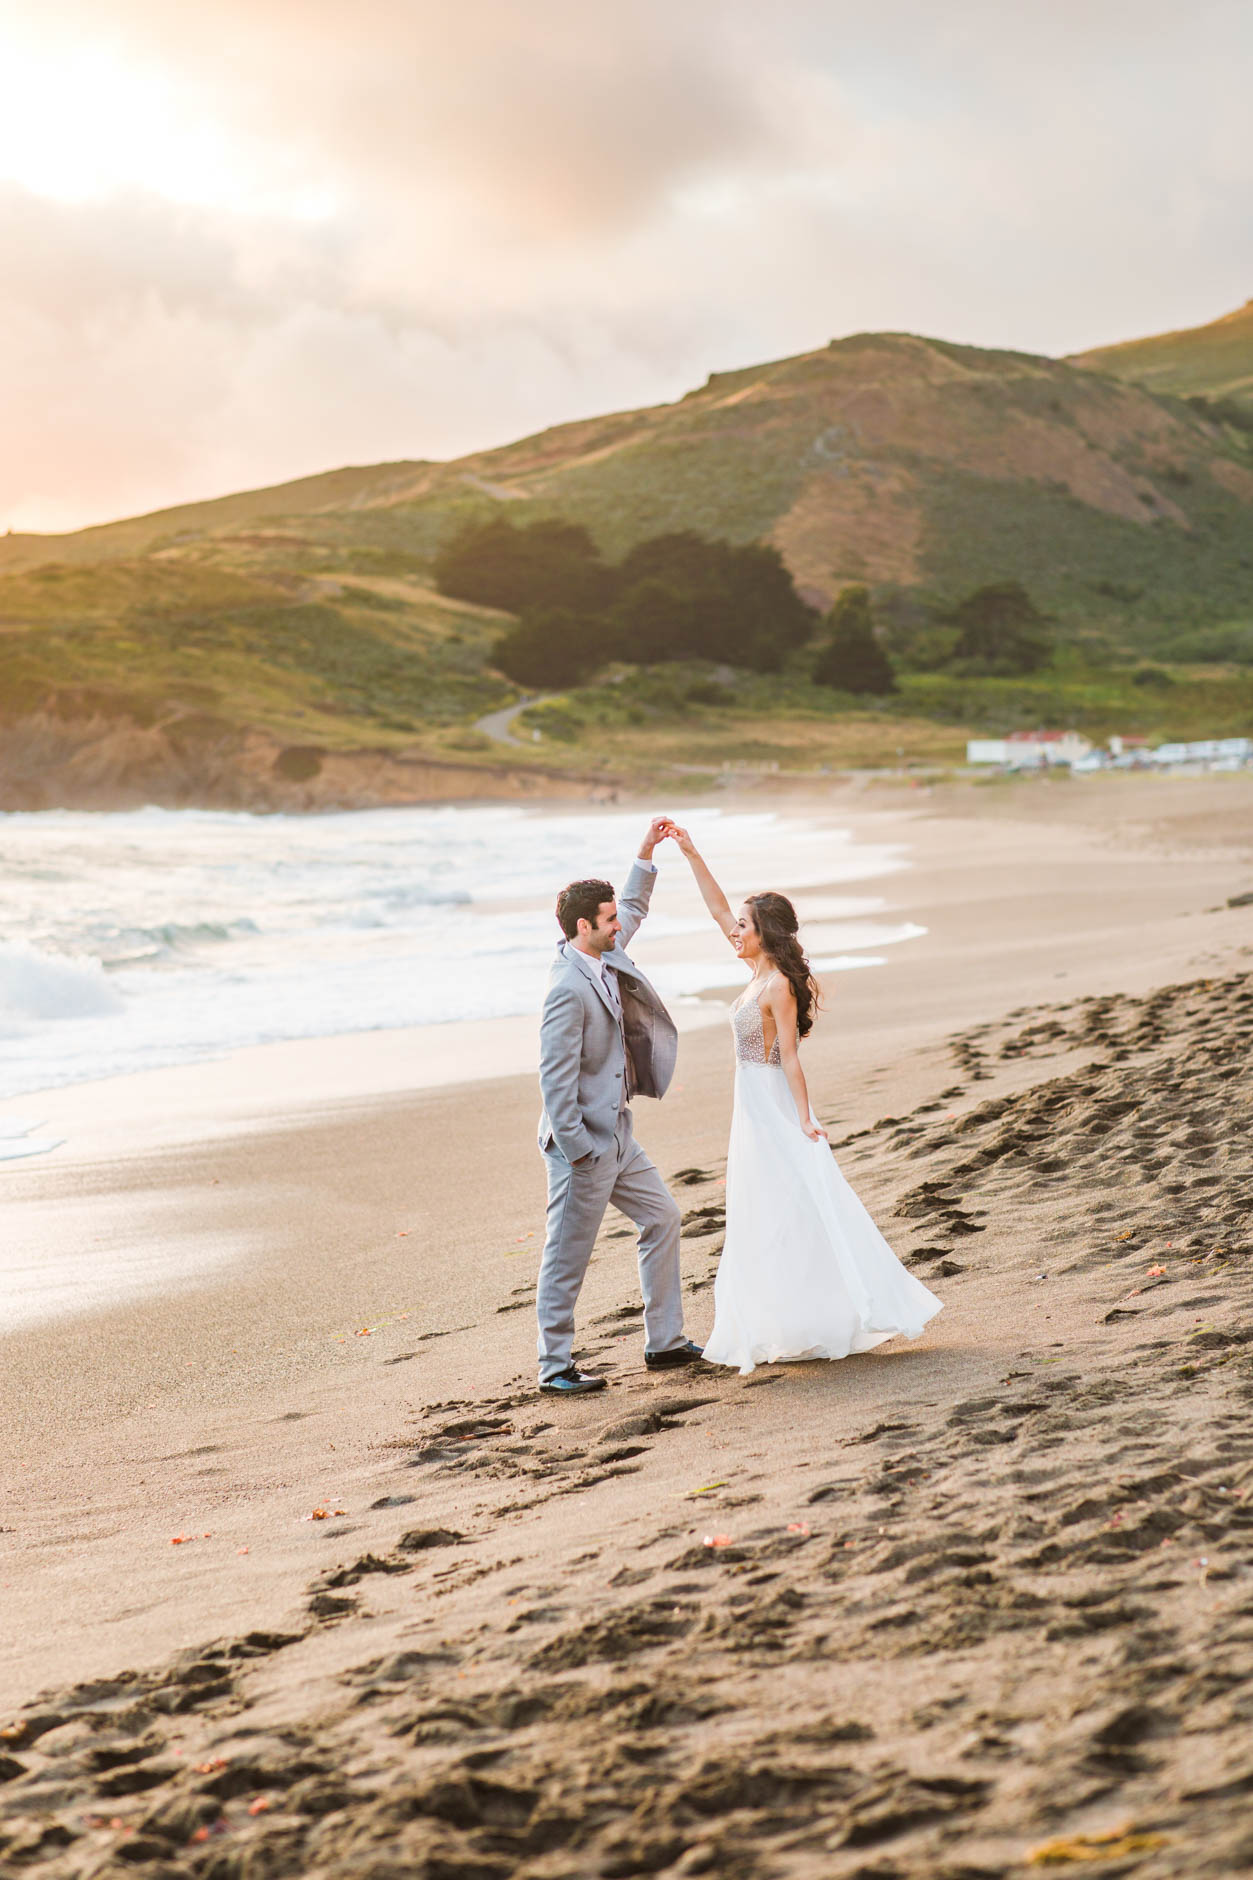 Windswept elopement photos of bride in white dress and groom in grey suit